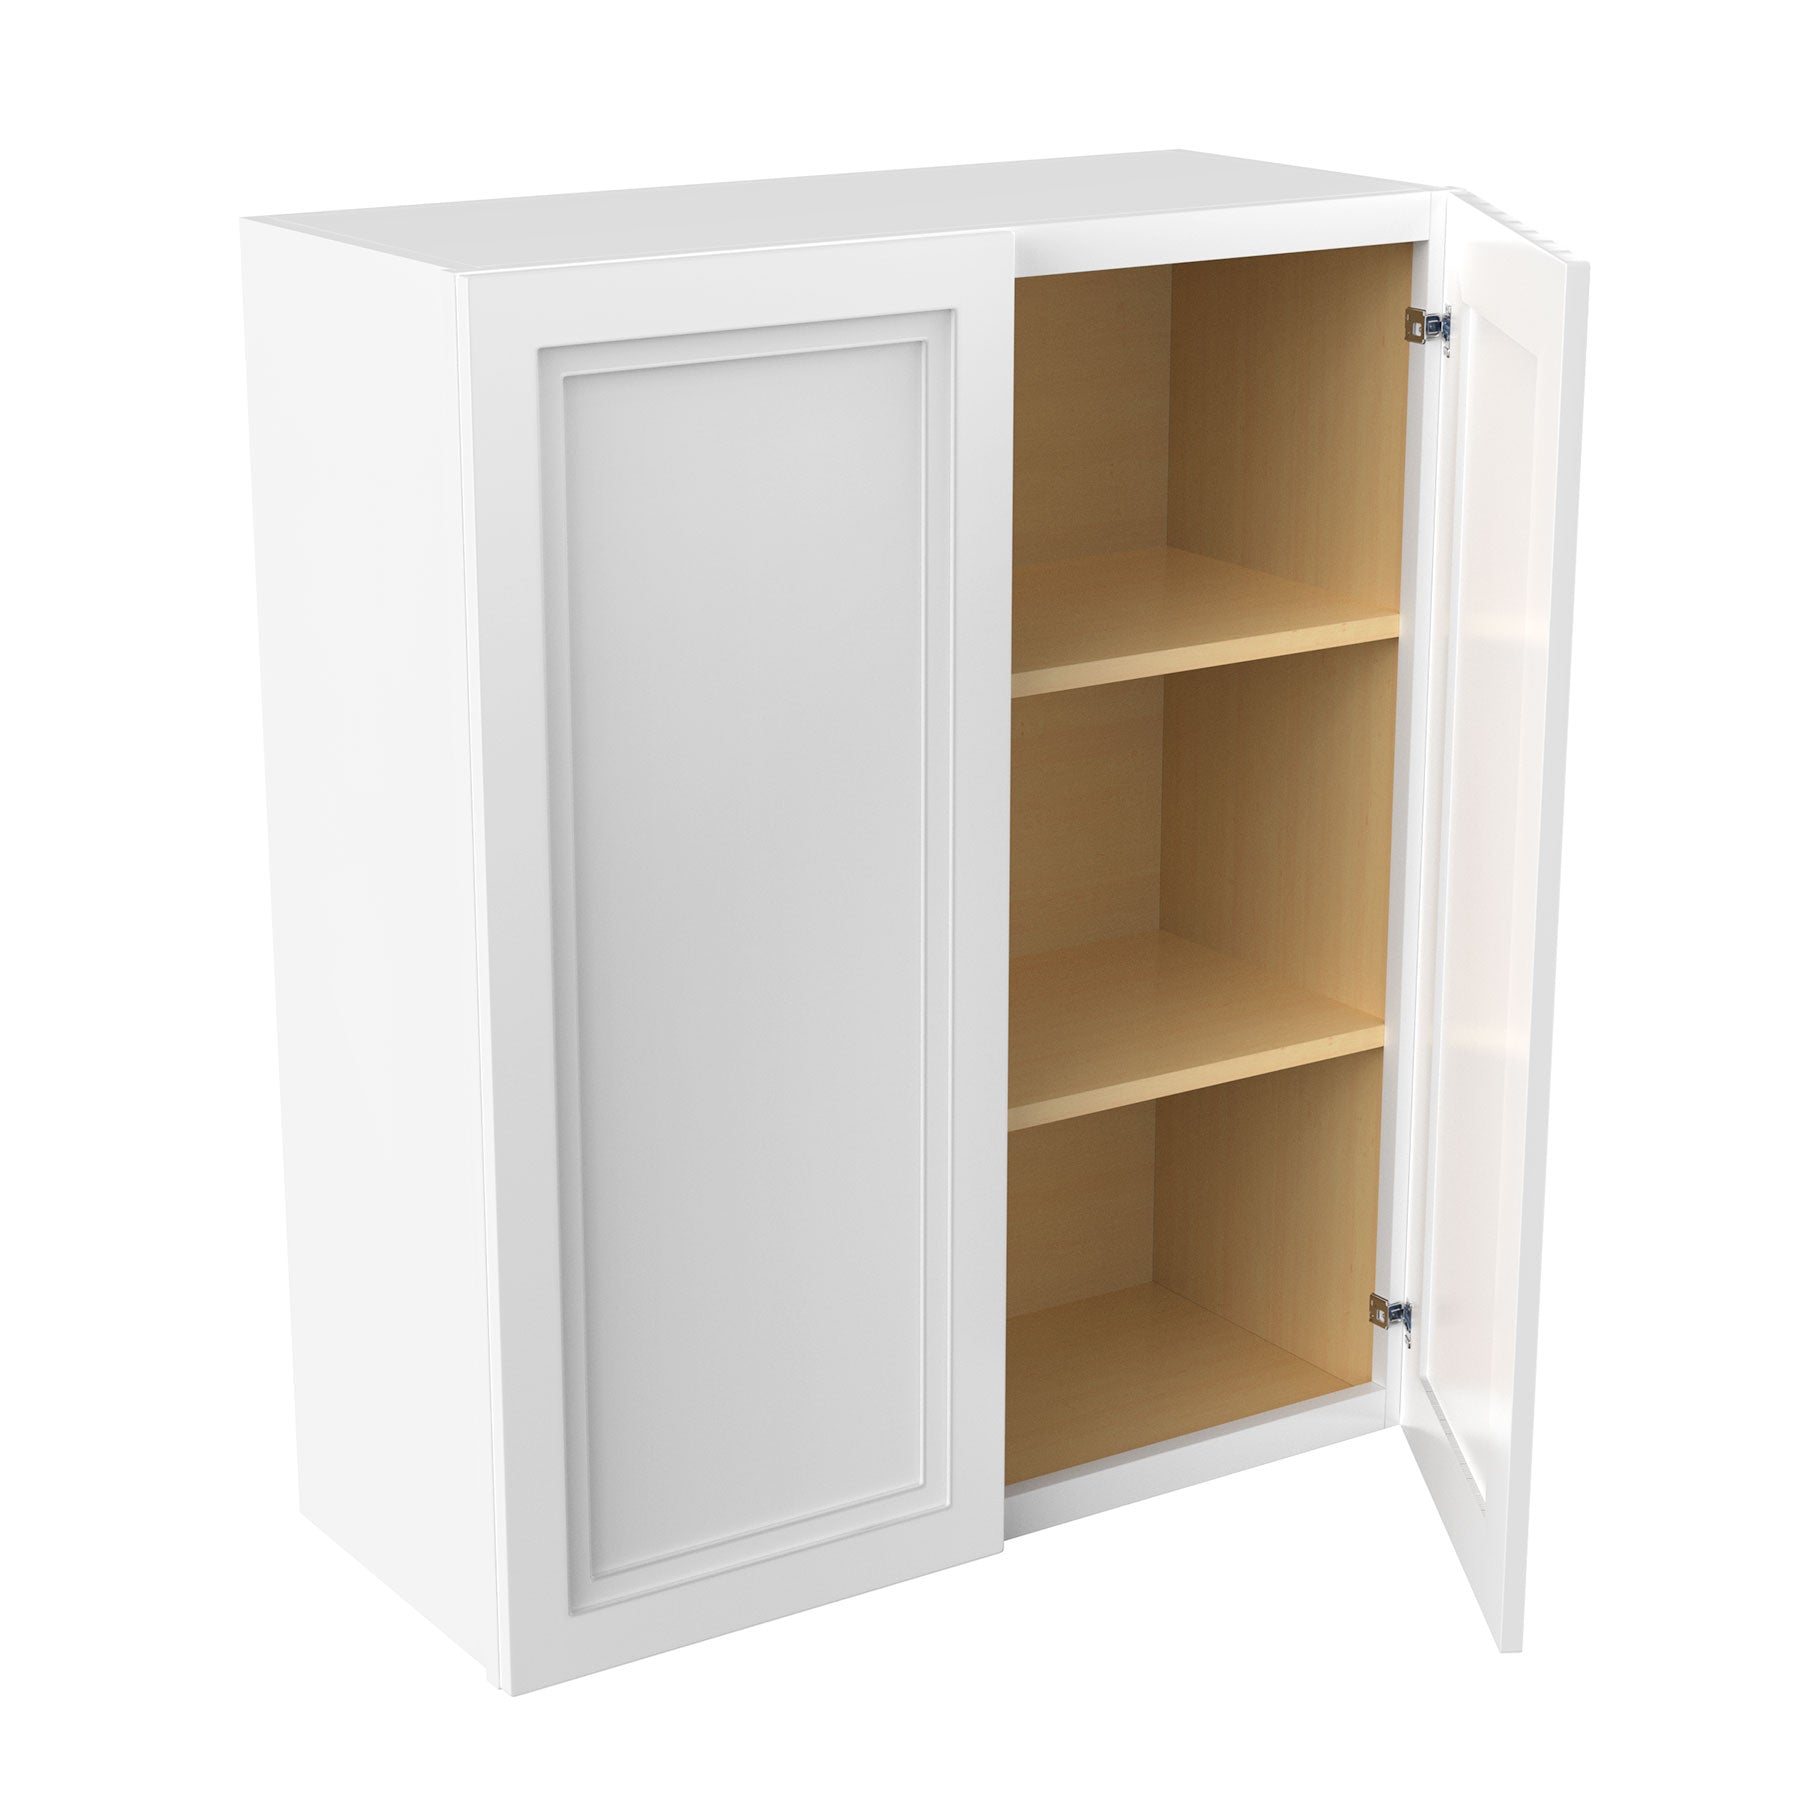 Fashion White - Double Door Wall Cabinet | 30"W x 36"H x 12"D